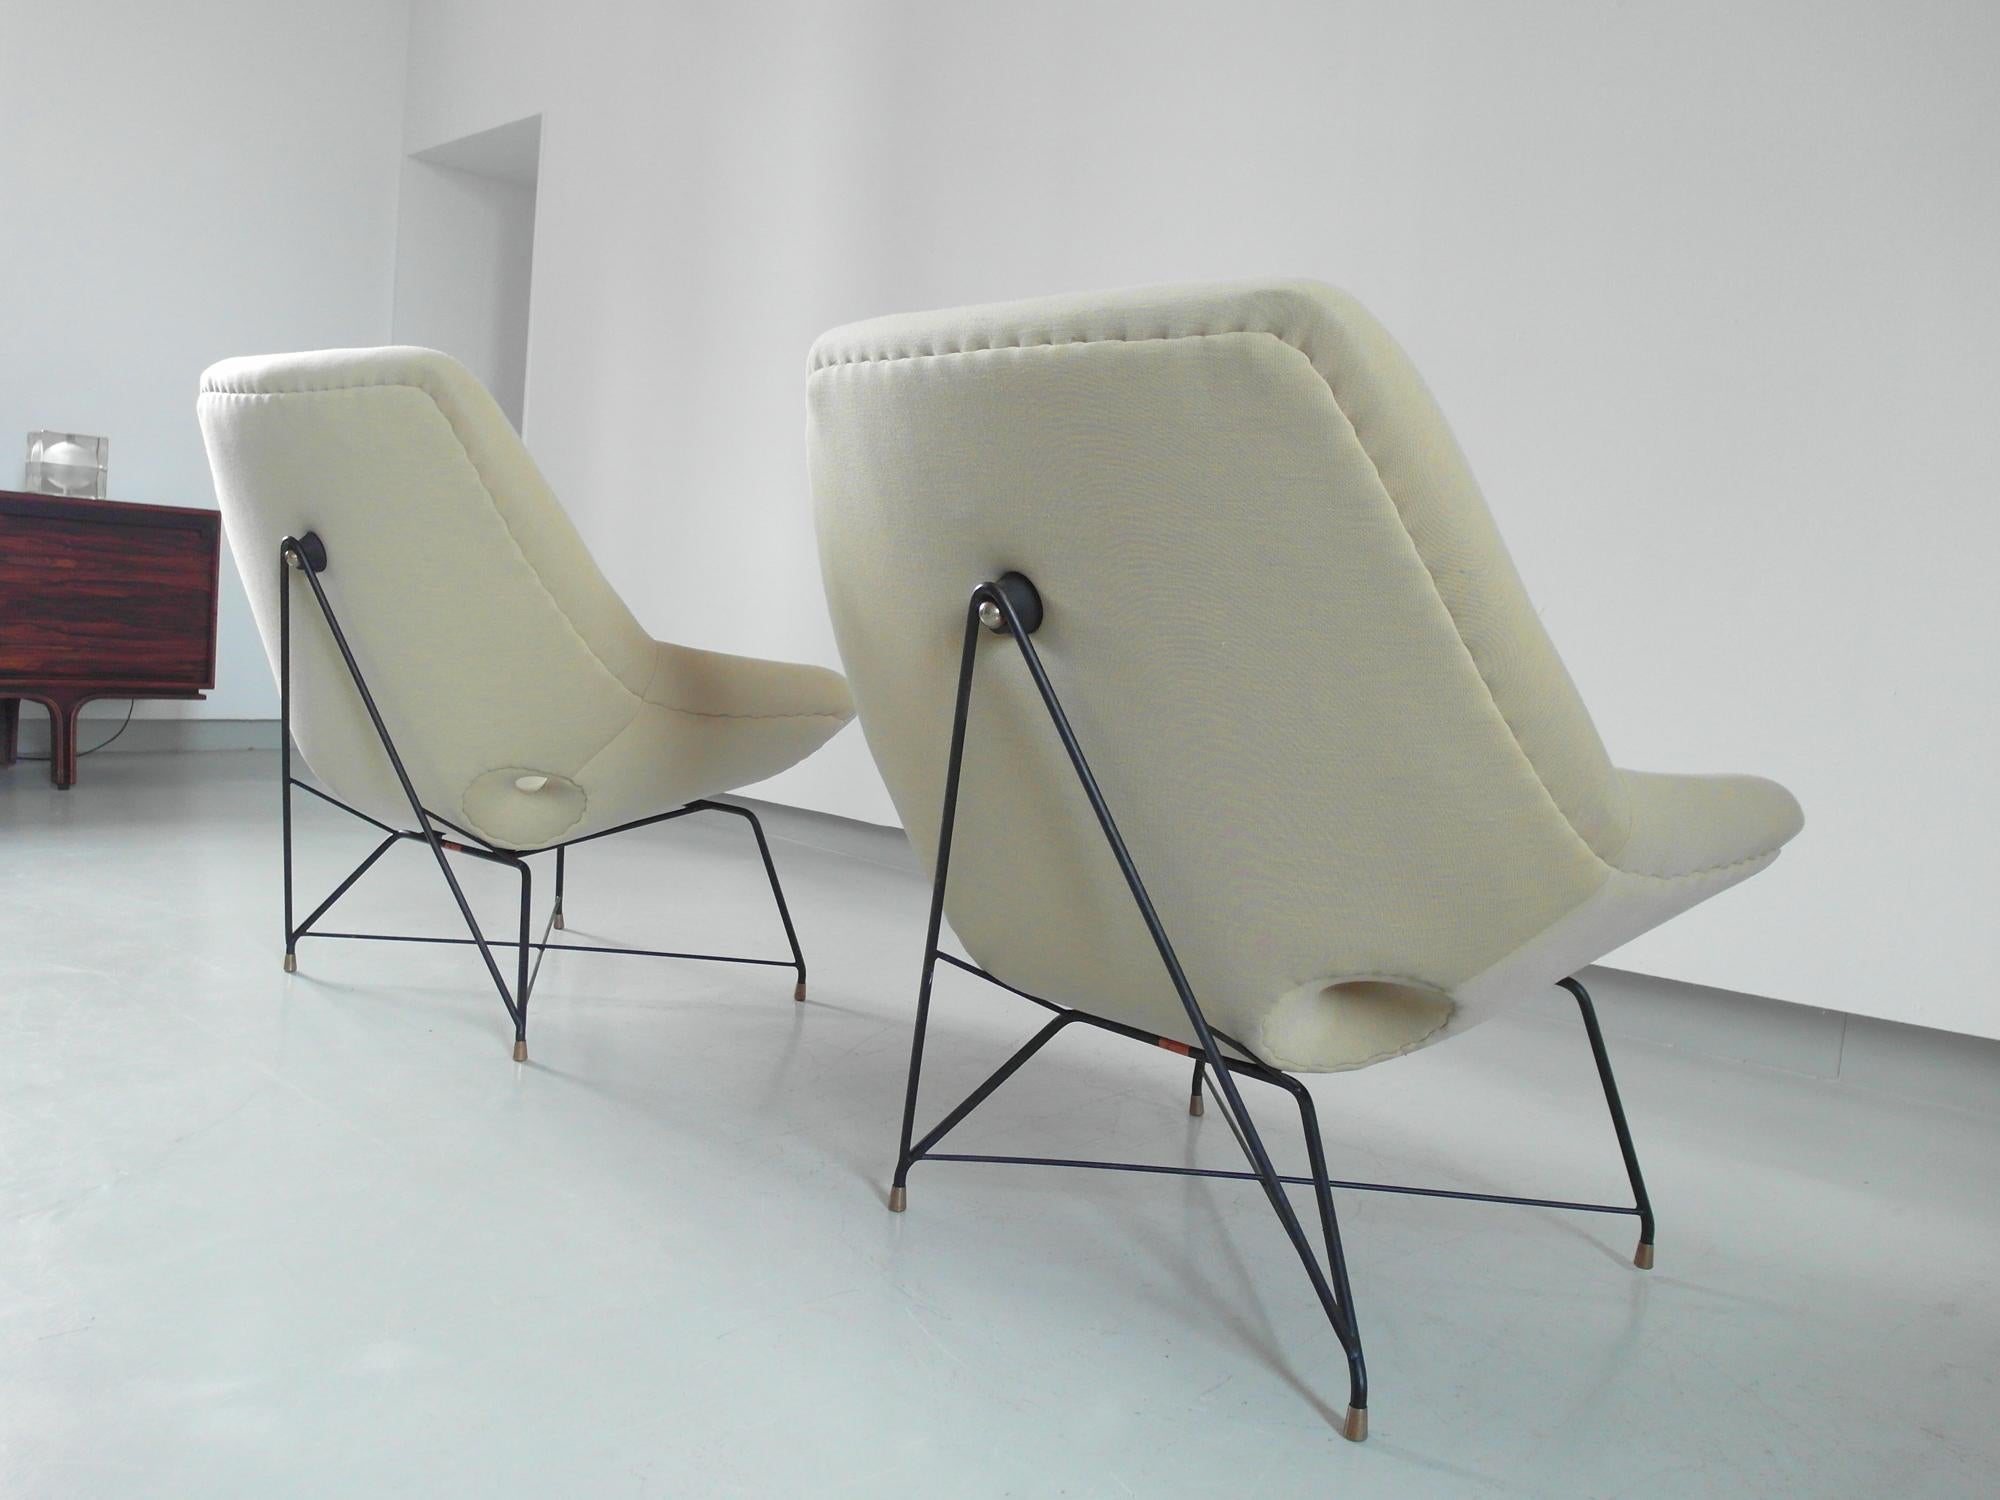 Sculptural Pair of Lounge Chairs by Augusto Bozzi for Saporiti, Italy, 1954 For Sale 2